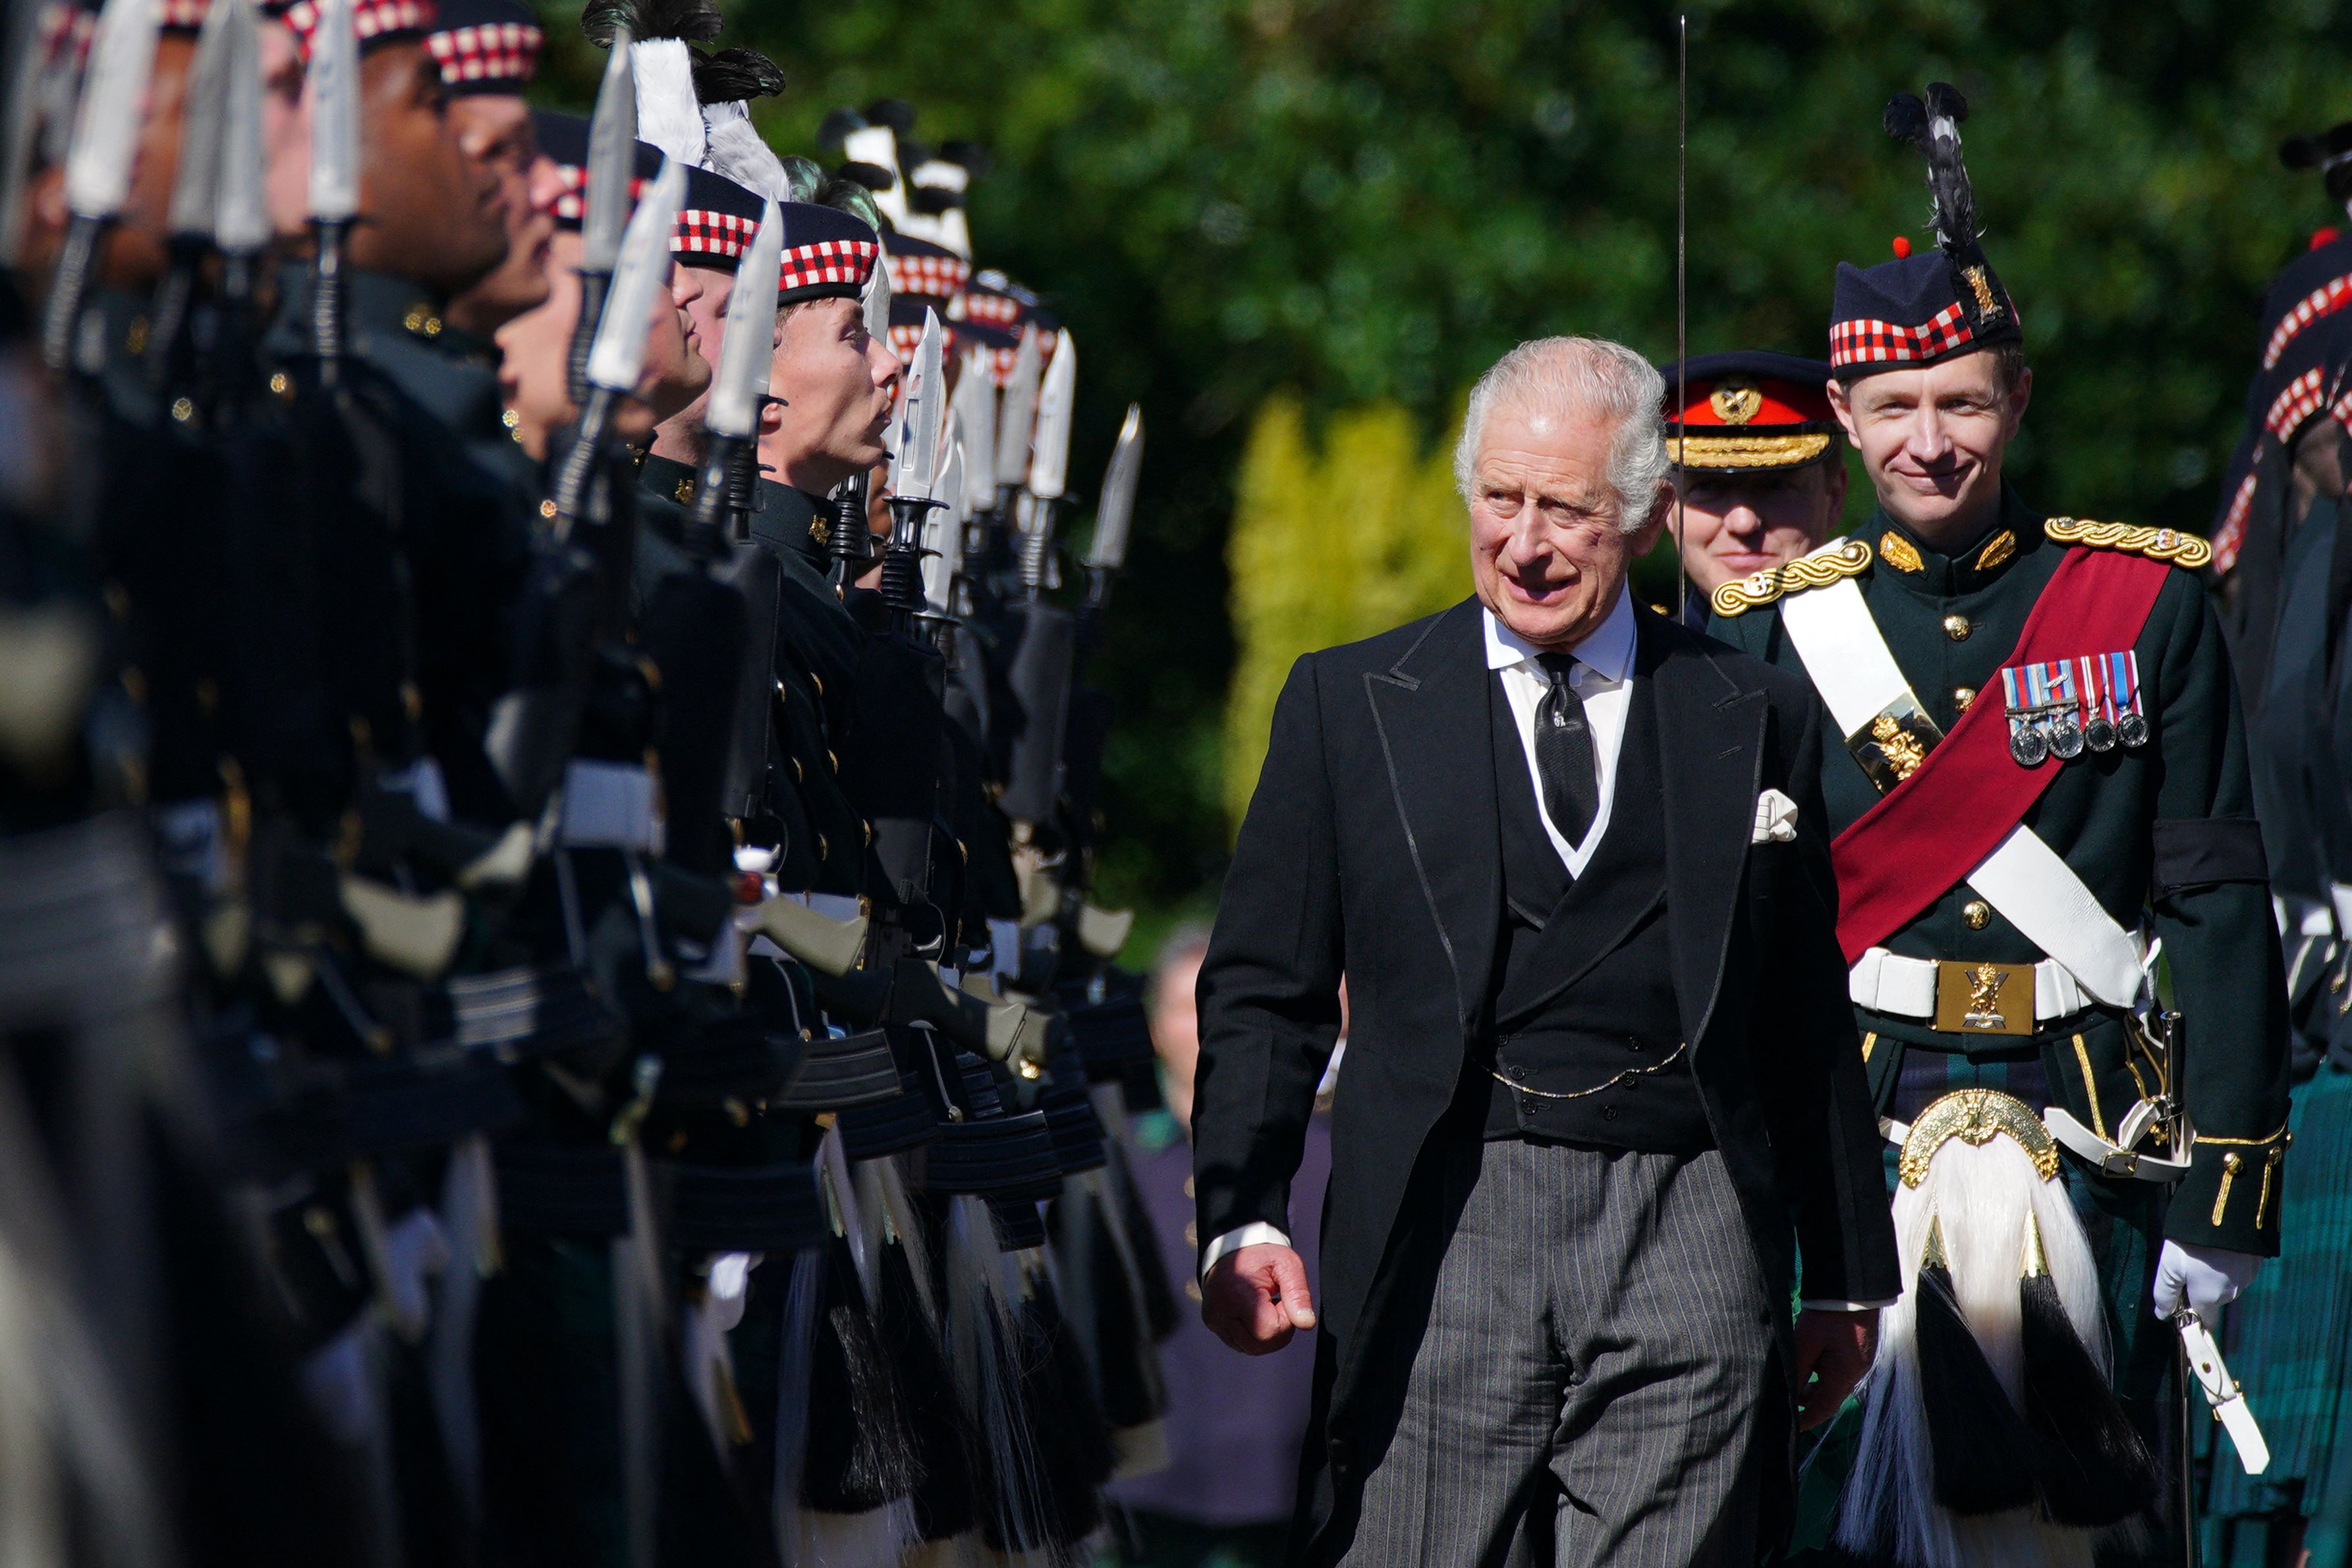 <p>Britain's King Charles III inspected an Honour Guard as he arrived at the Palace of Holyroodhouse in Edinburgh, Scotland, on Sept. 12, 2022, before following his mother Queen Elizabeth II's coffin from there to St. Giles Cathedral.</p>